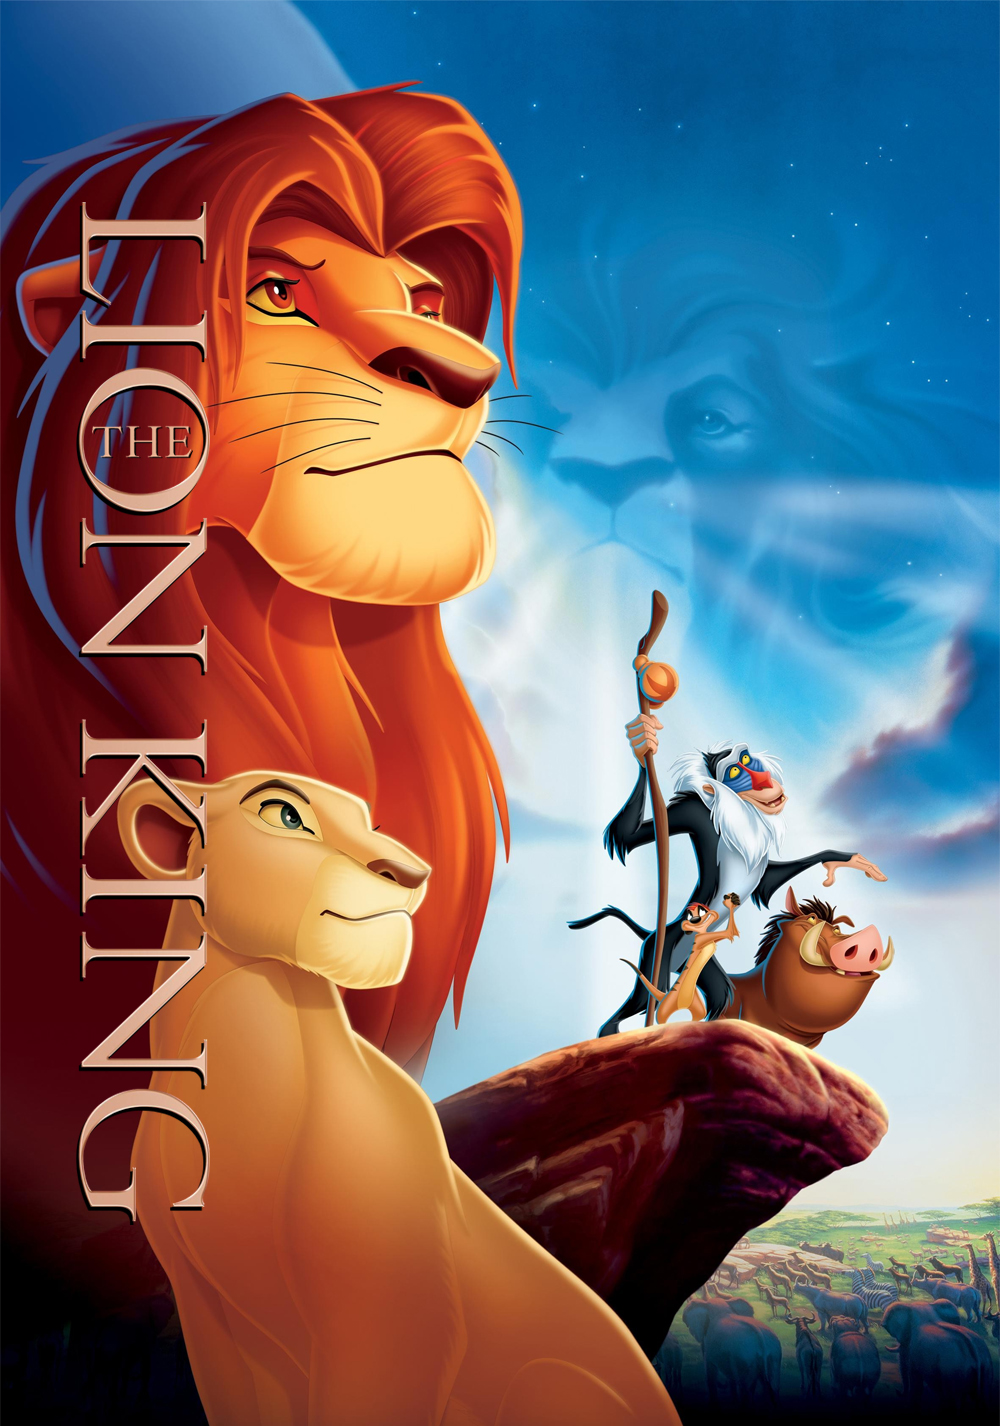 the-lion-king-1994